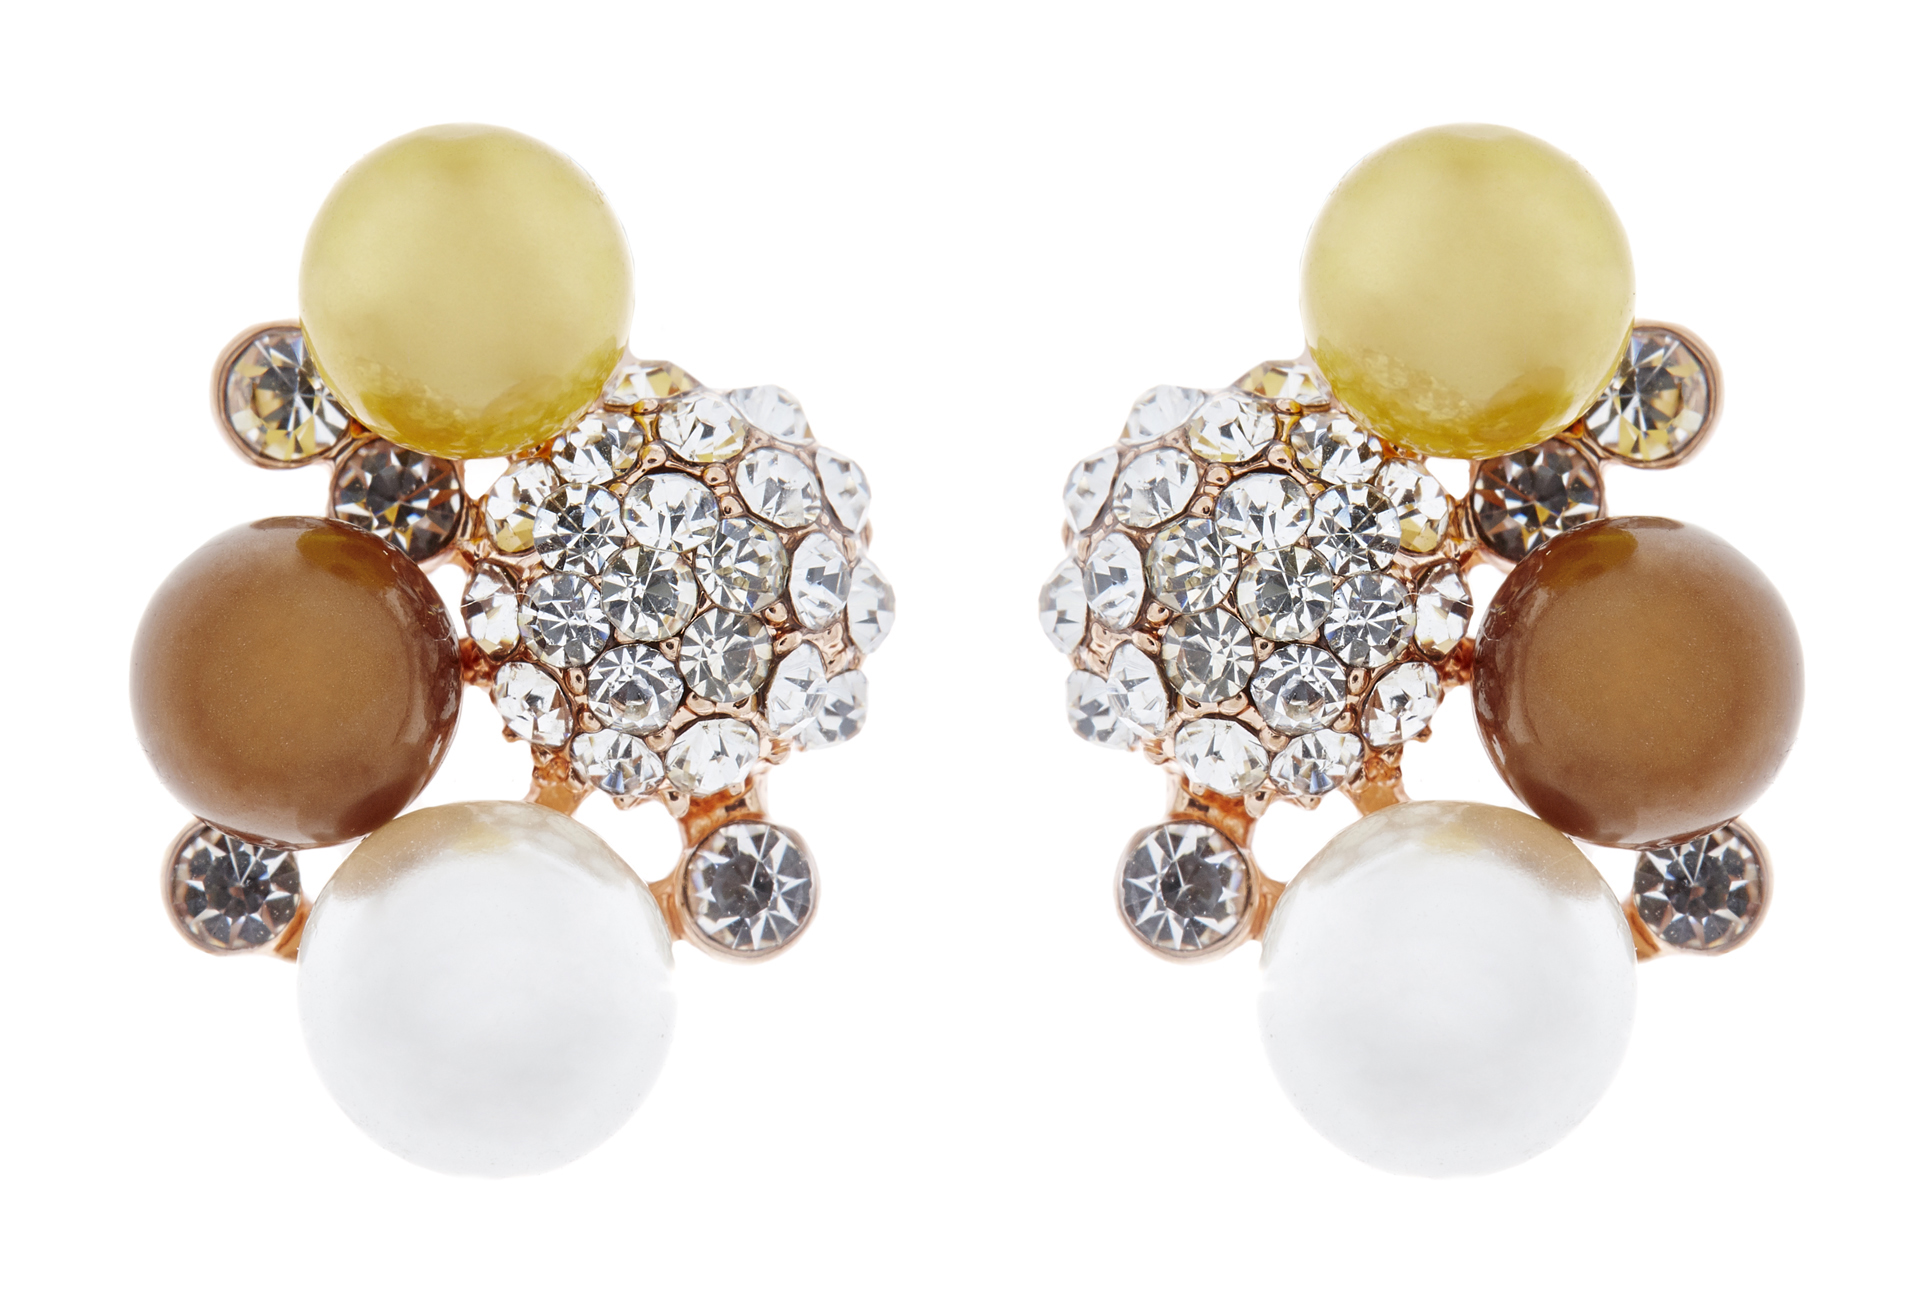 Clip On Earrings - Hilda - gold earring with crystals and coloured pearls